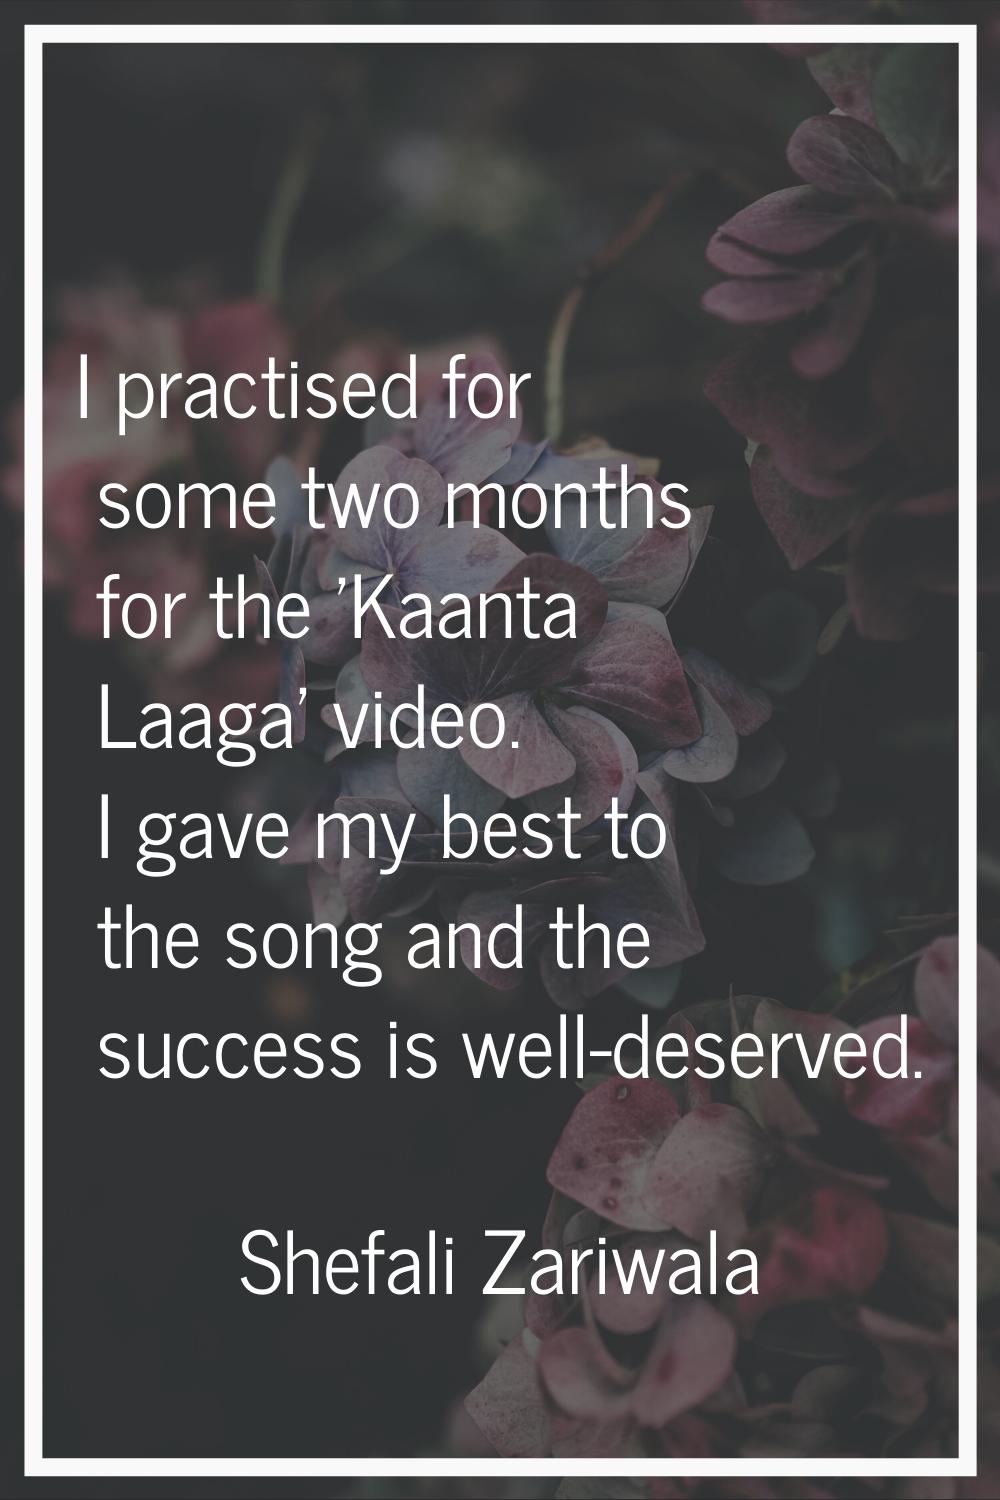 I practised for some two months for the 'Kaanta Laaga' video. I gave my best to the song and the su